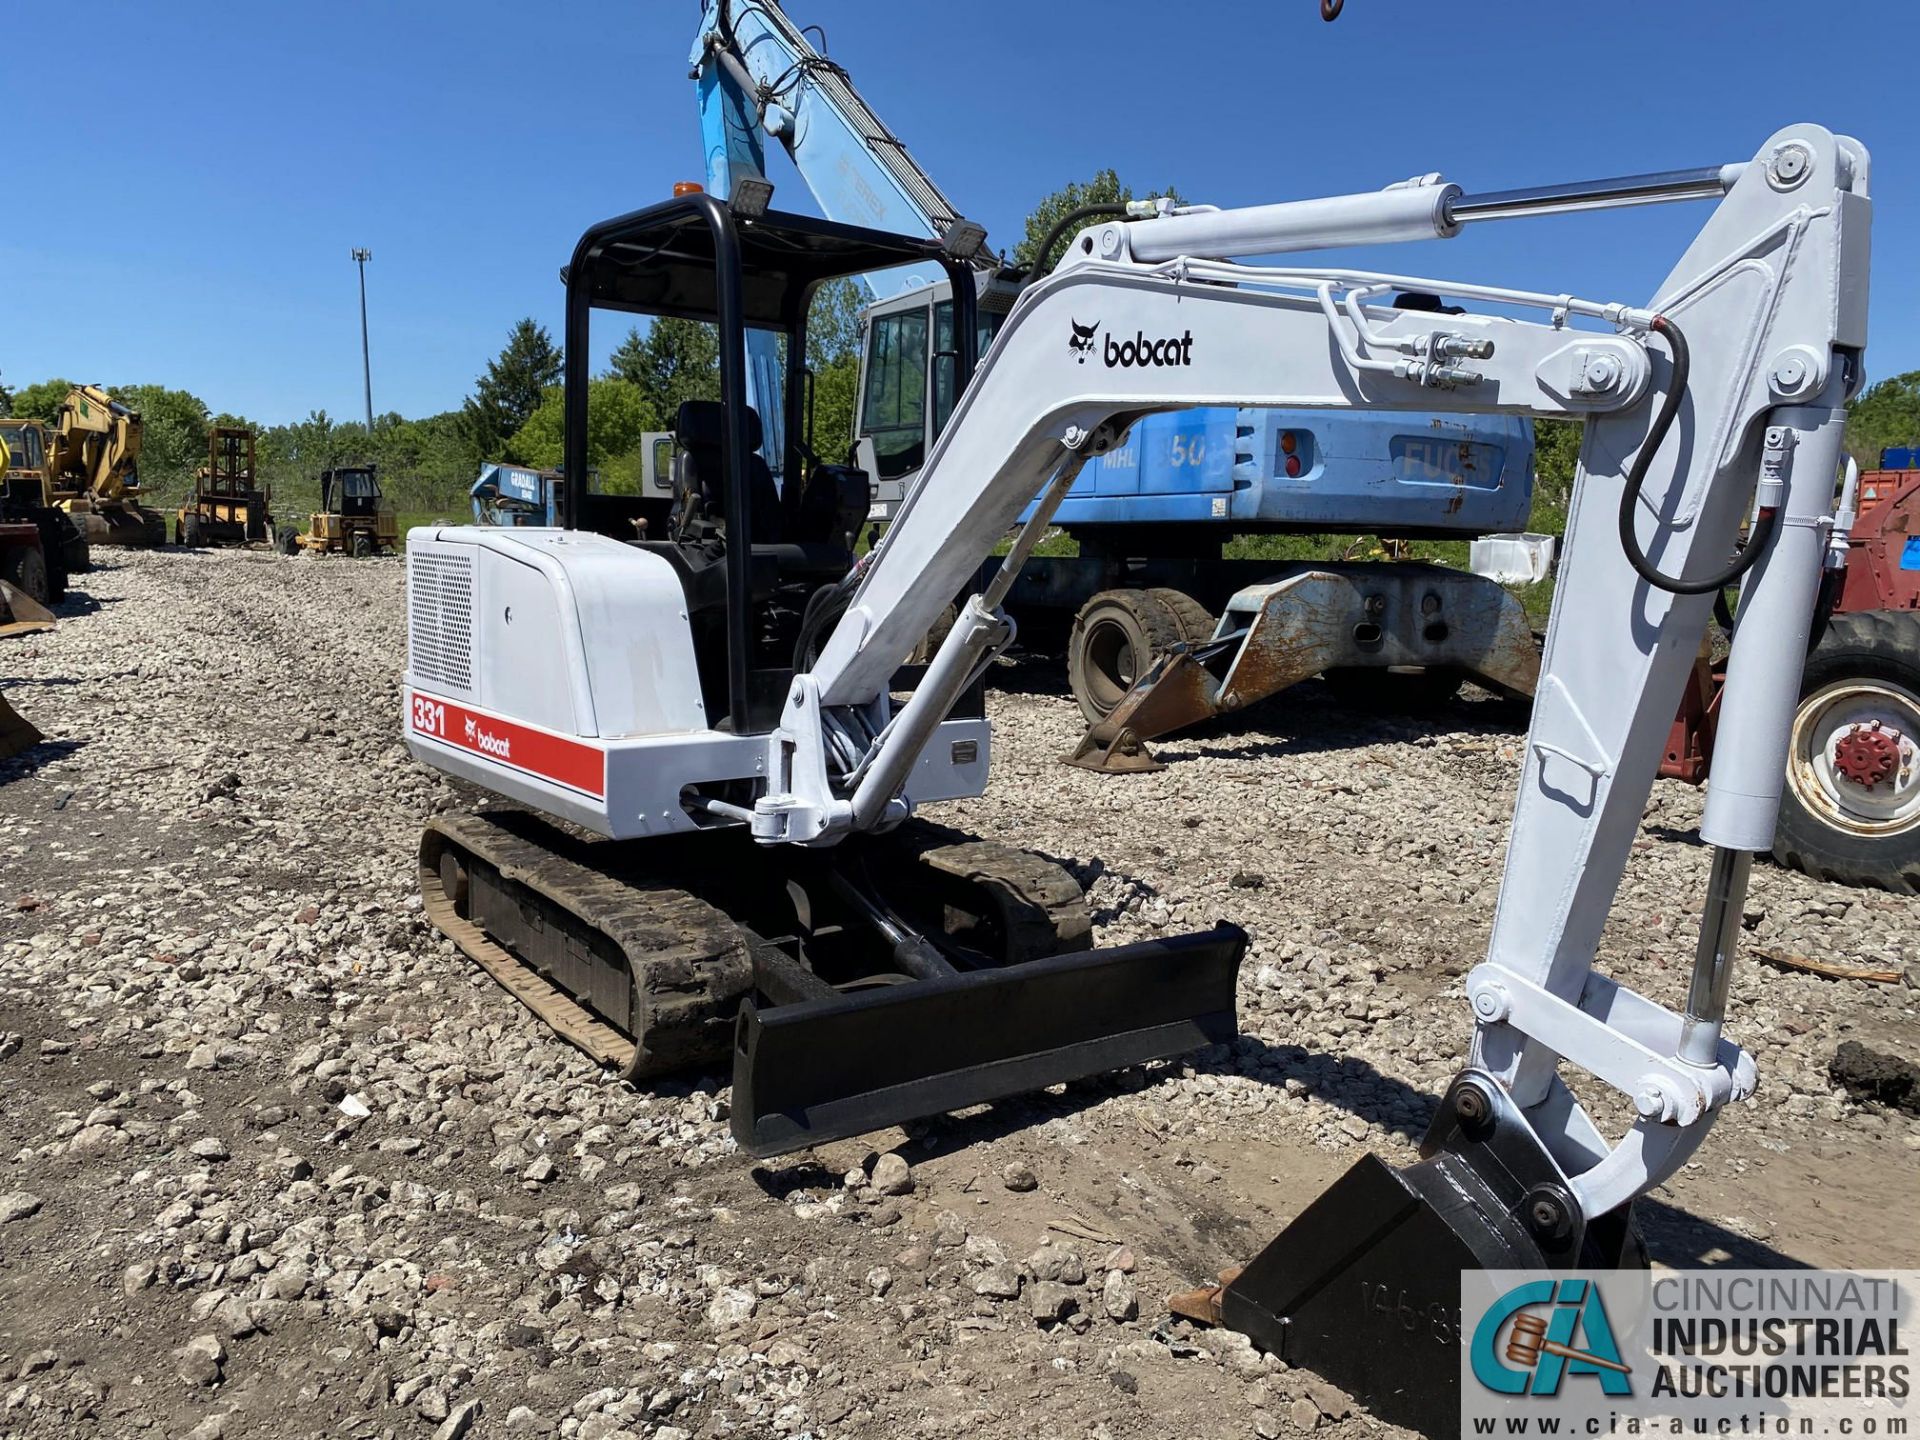 BOBCAT 331 MINI EXCAVATOR, 4-CYLINDER DIESEL ENGINE, 6,275 HOURS; S/N 511920385, WITH 20" TOOTH - Image 5 of 7